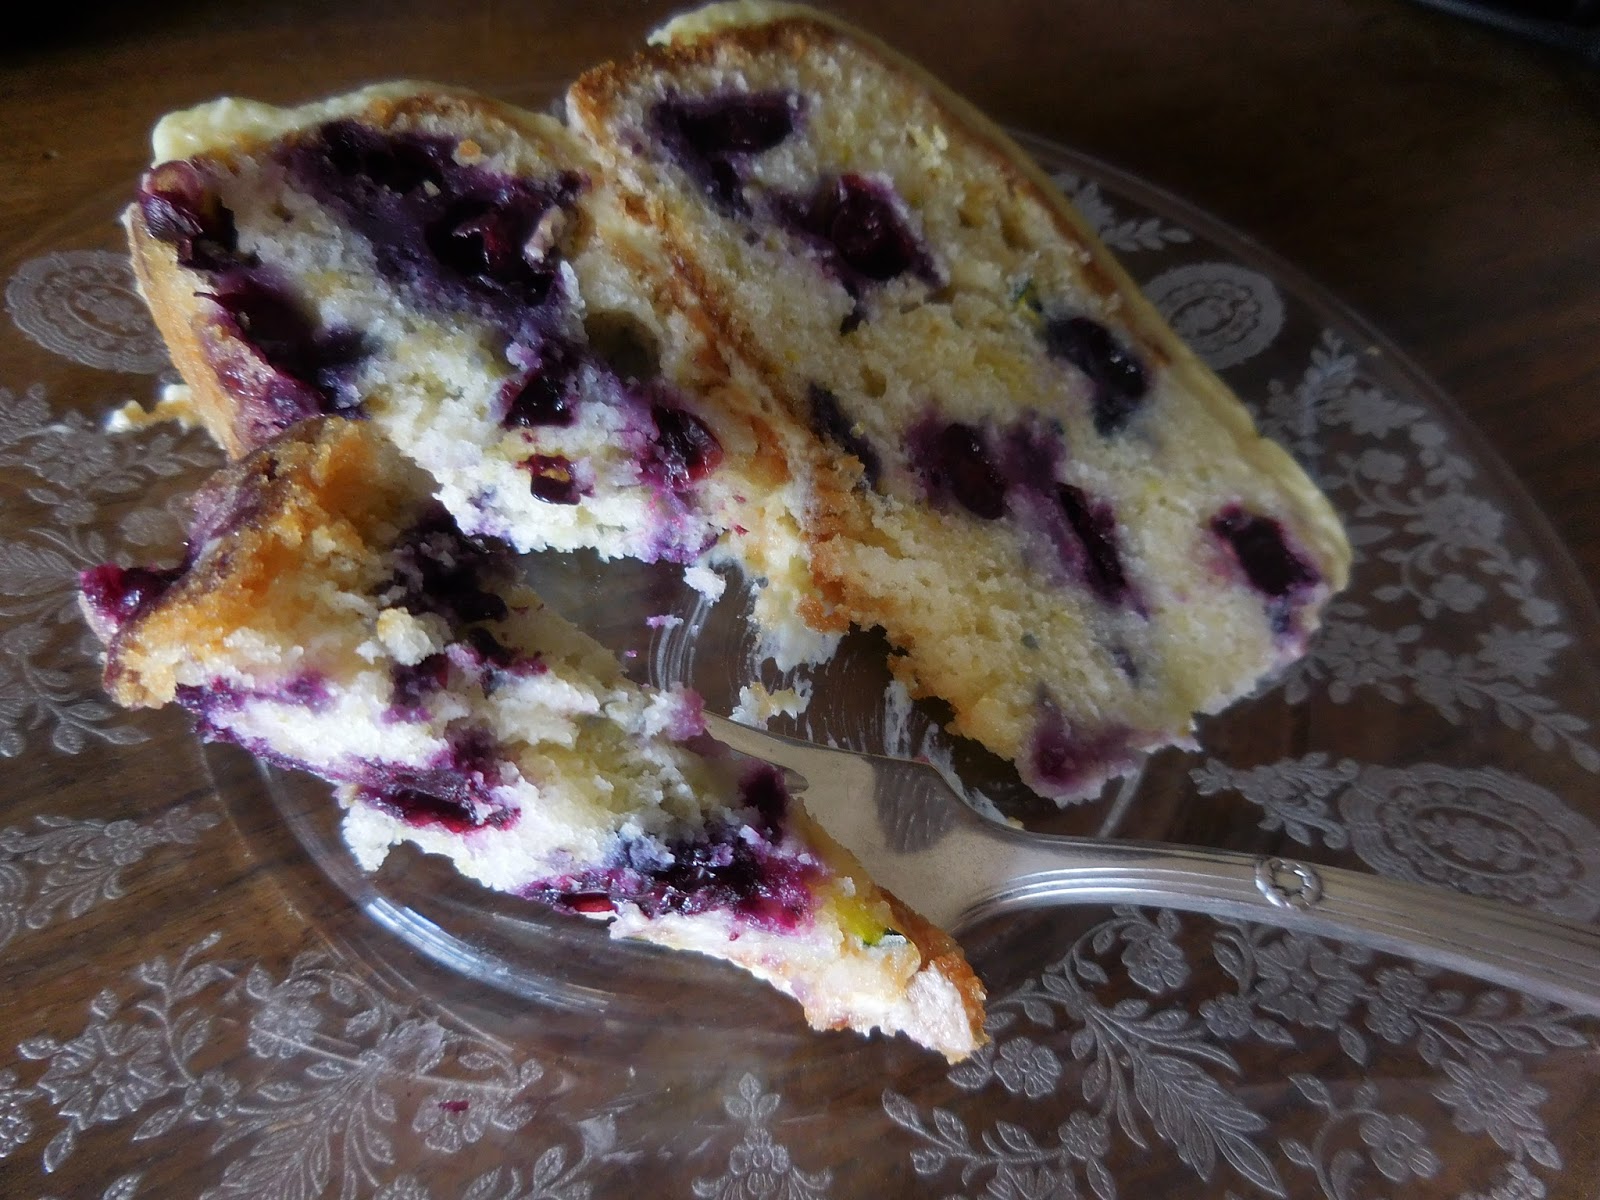 Blueberry Zucchini Cake with Lemon Cream Cheese Frosting